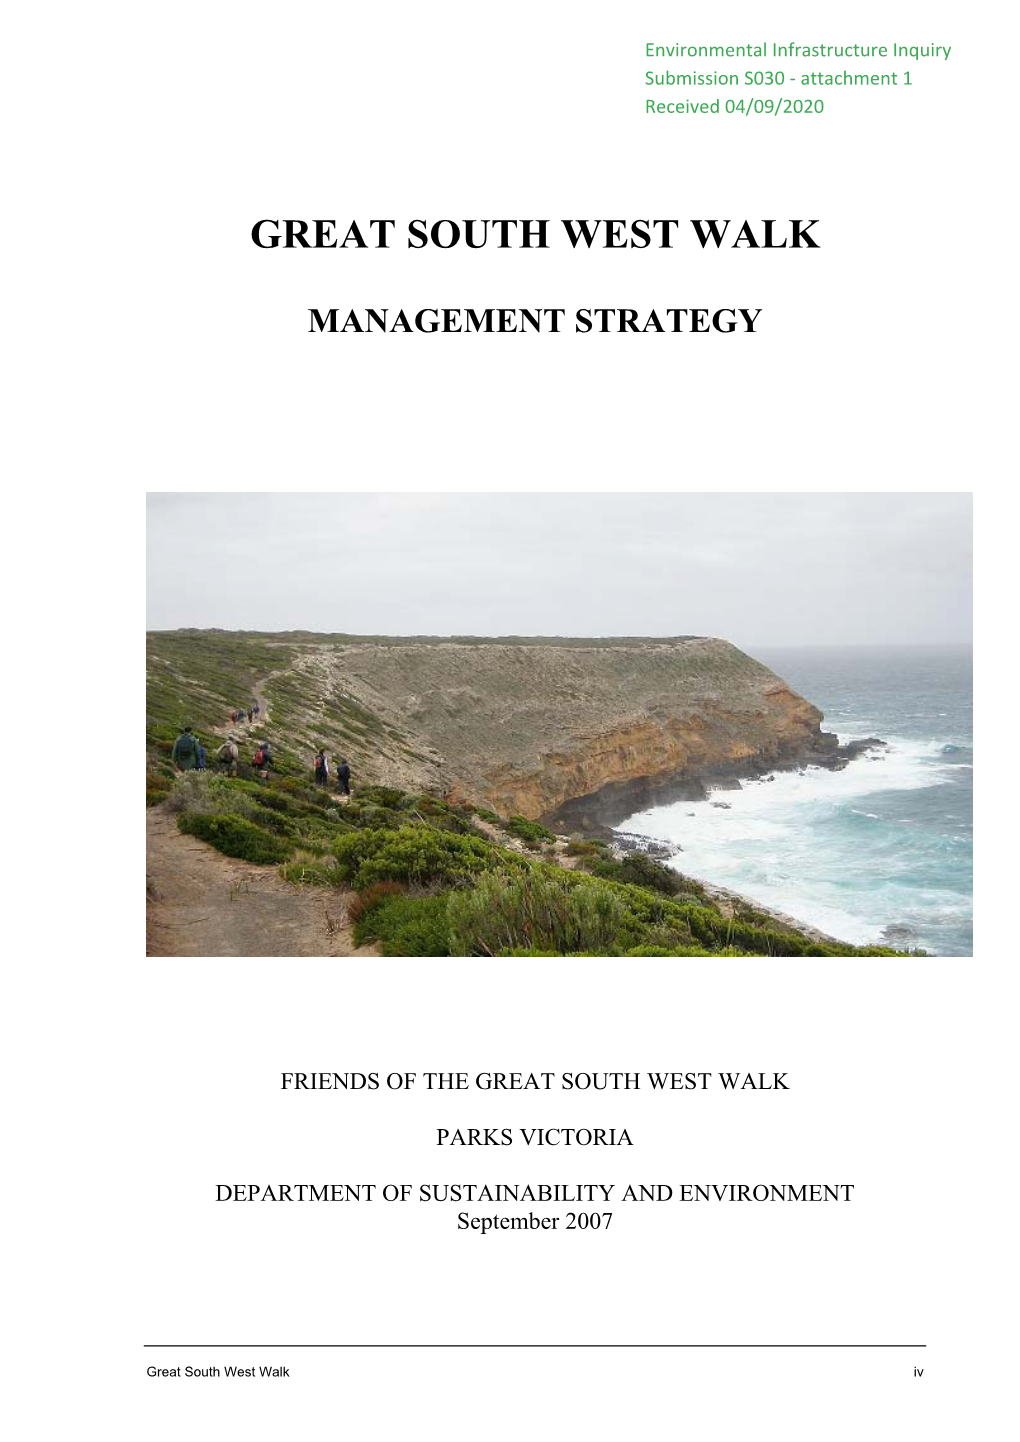 Friends of the Great South West Walk